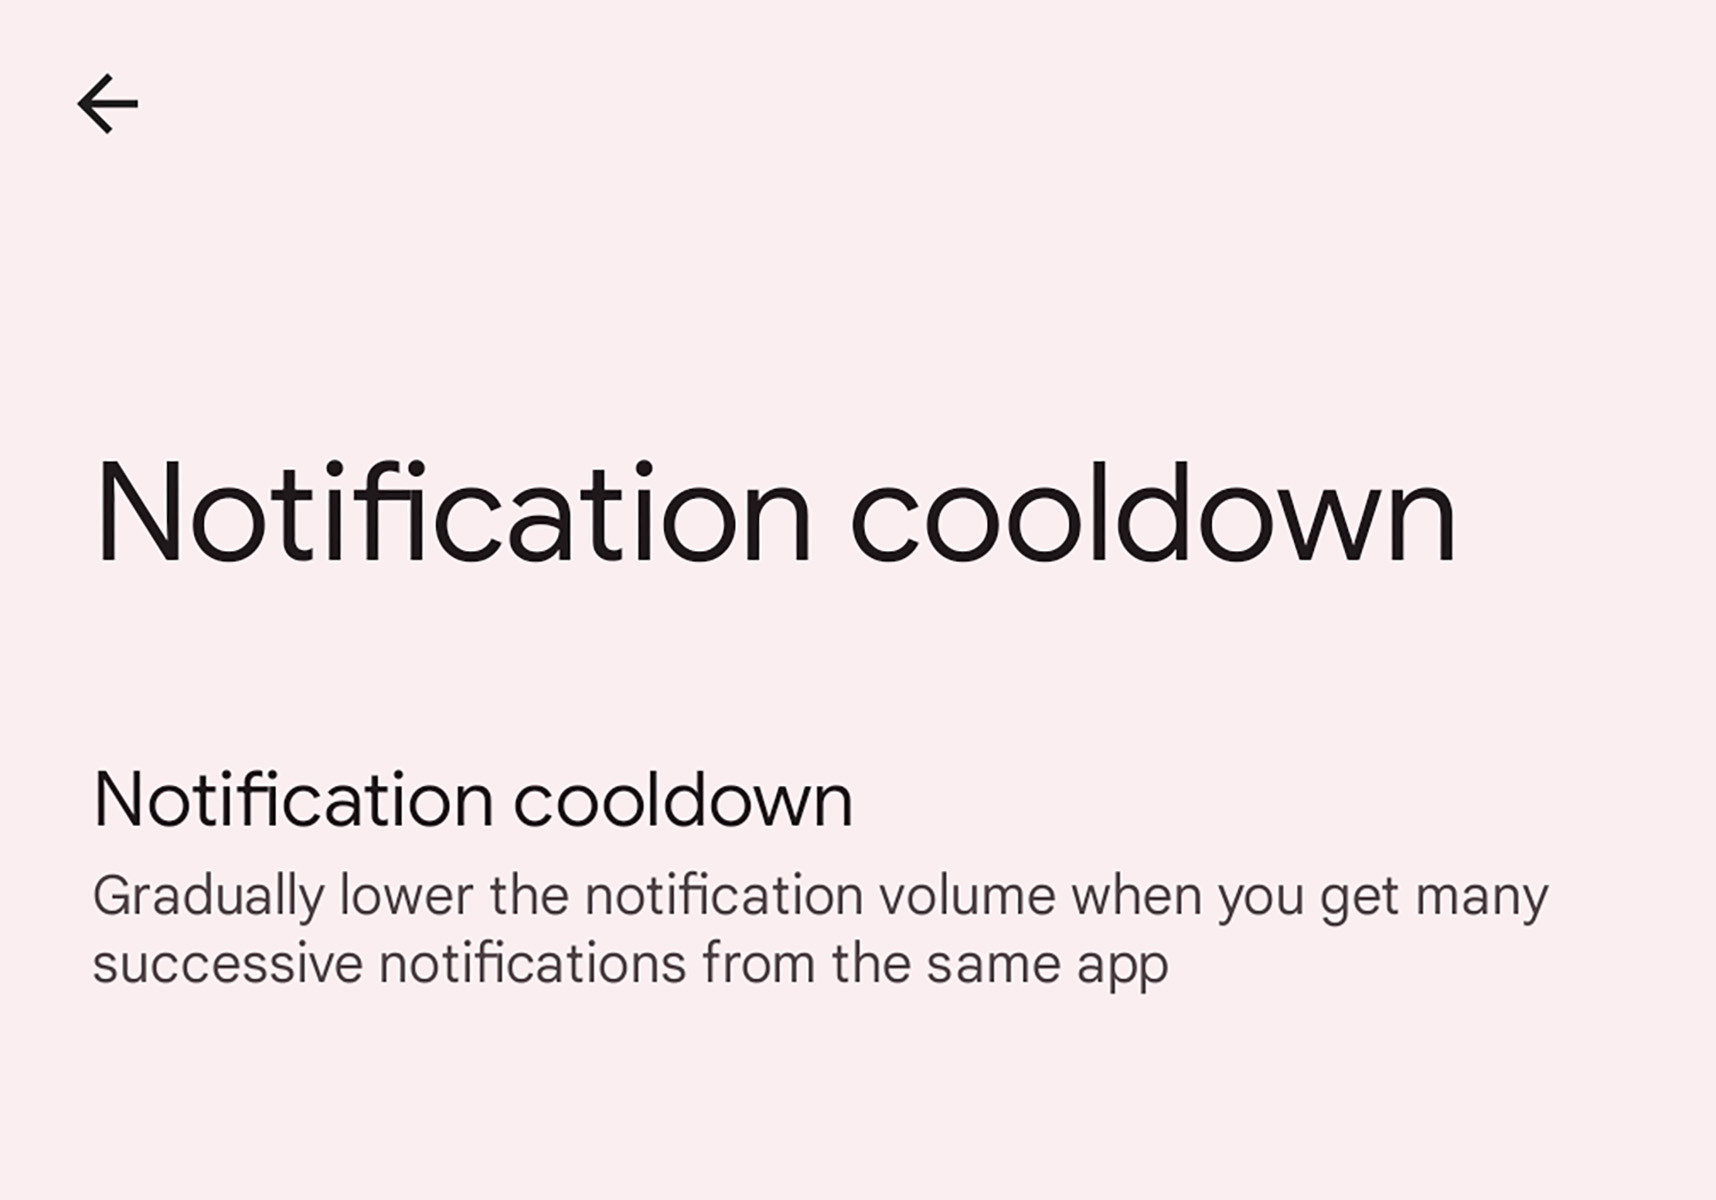 Android 15 - Notification Cooldown